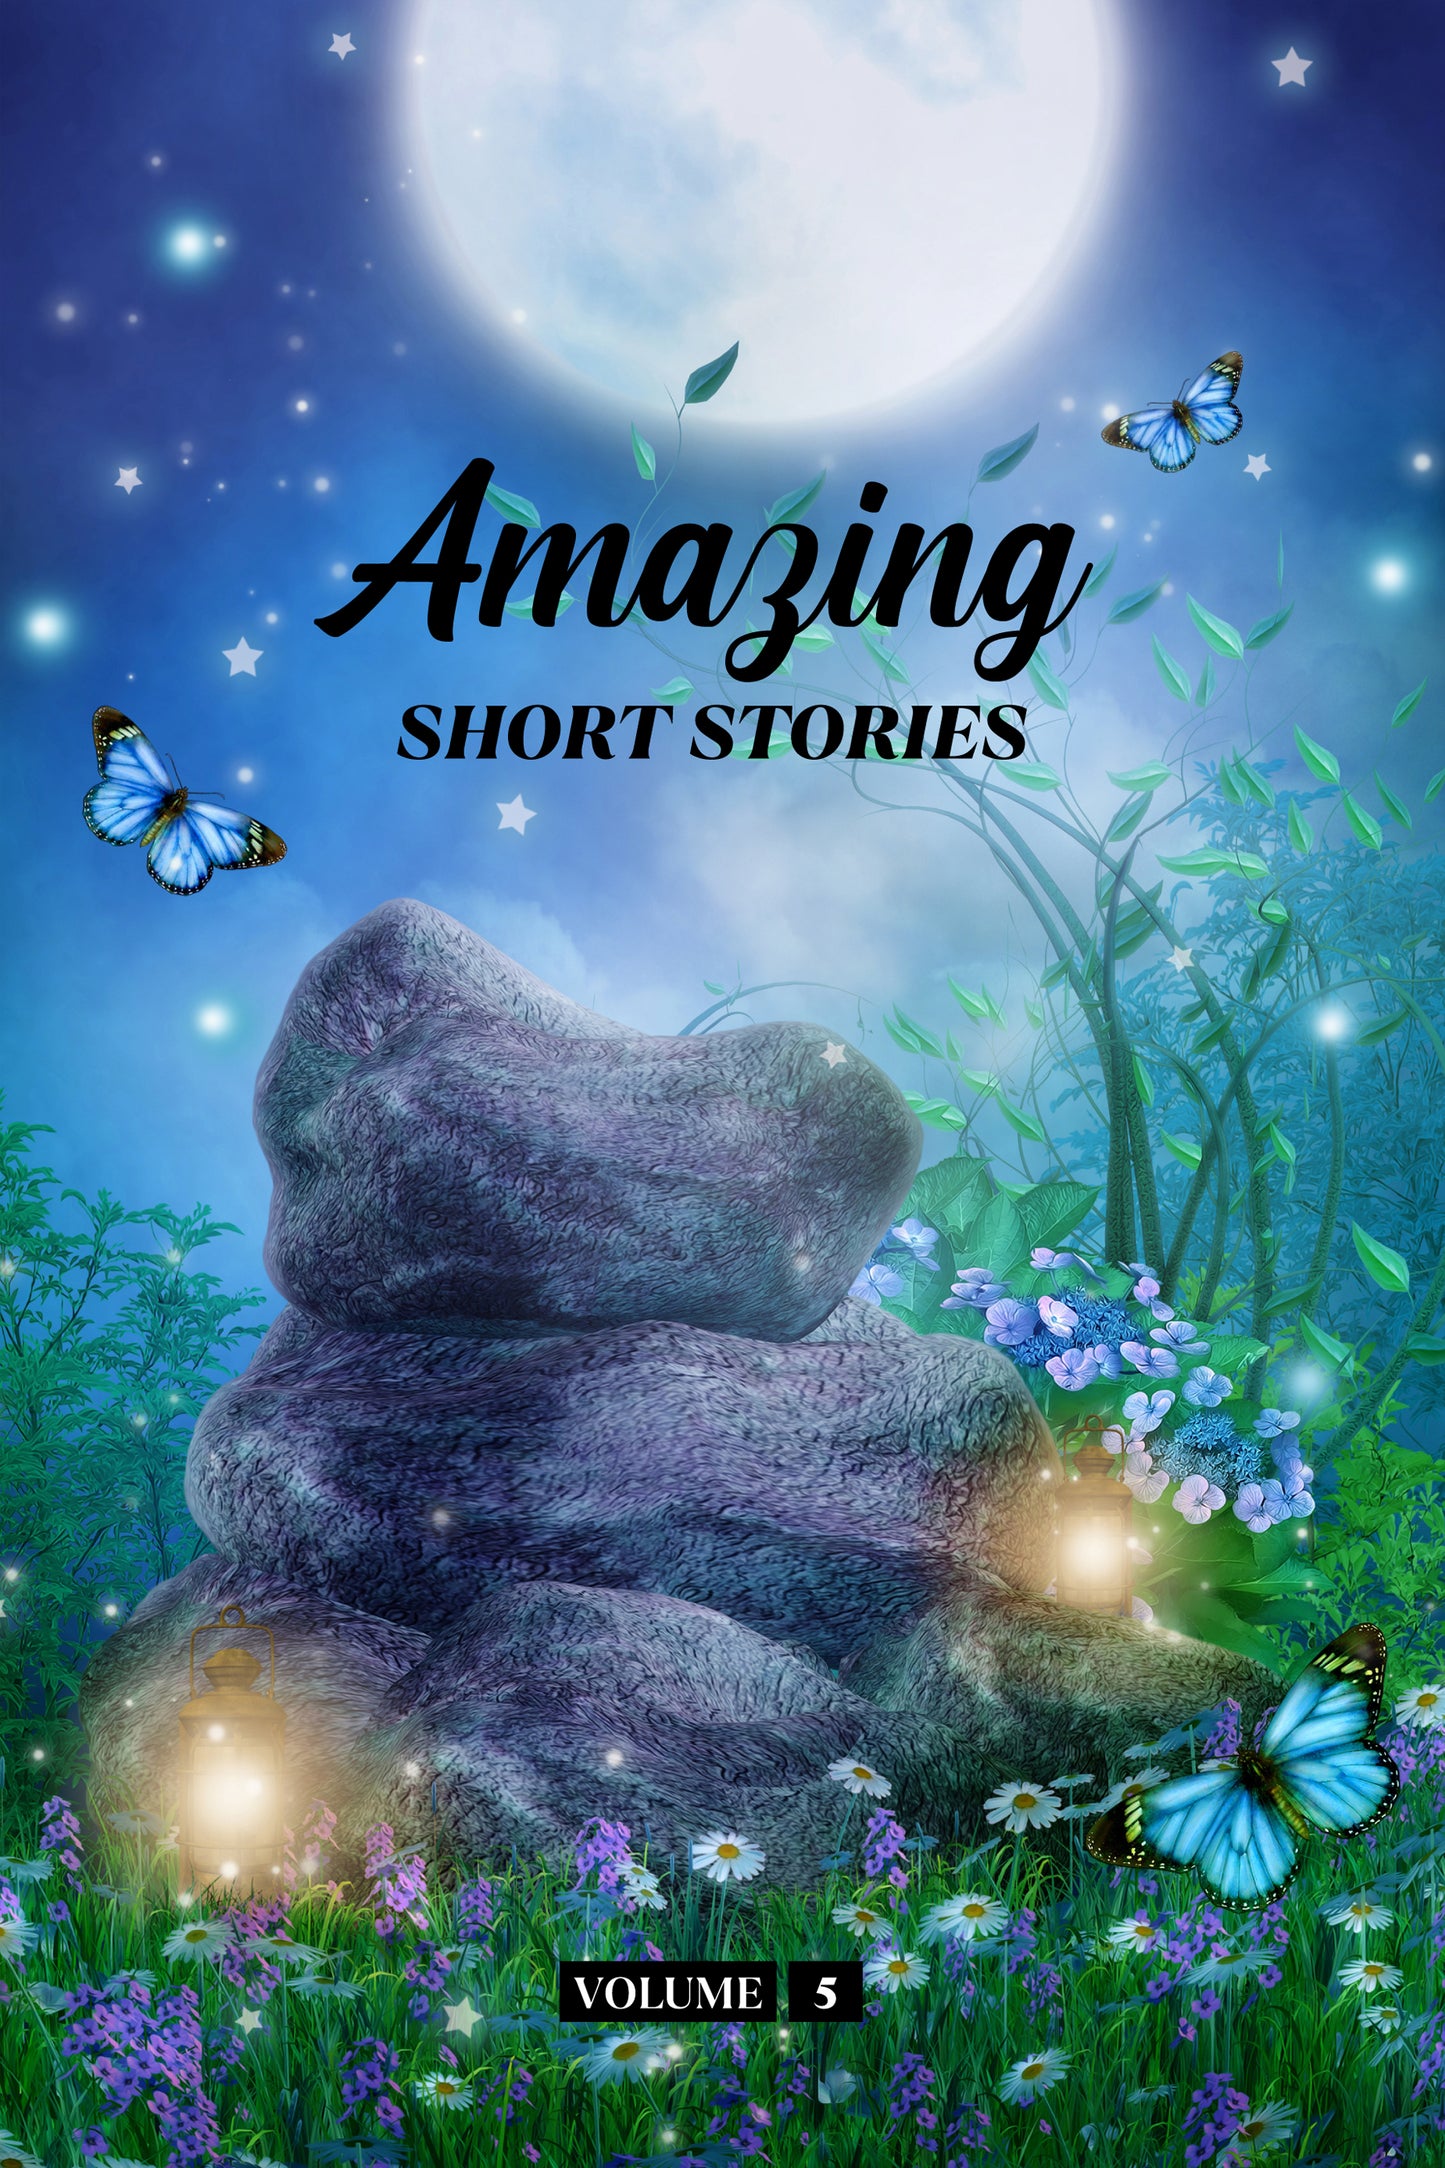 Amazing Short Stories Volume 5 (Physical Book)